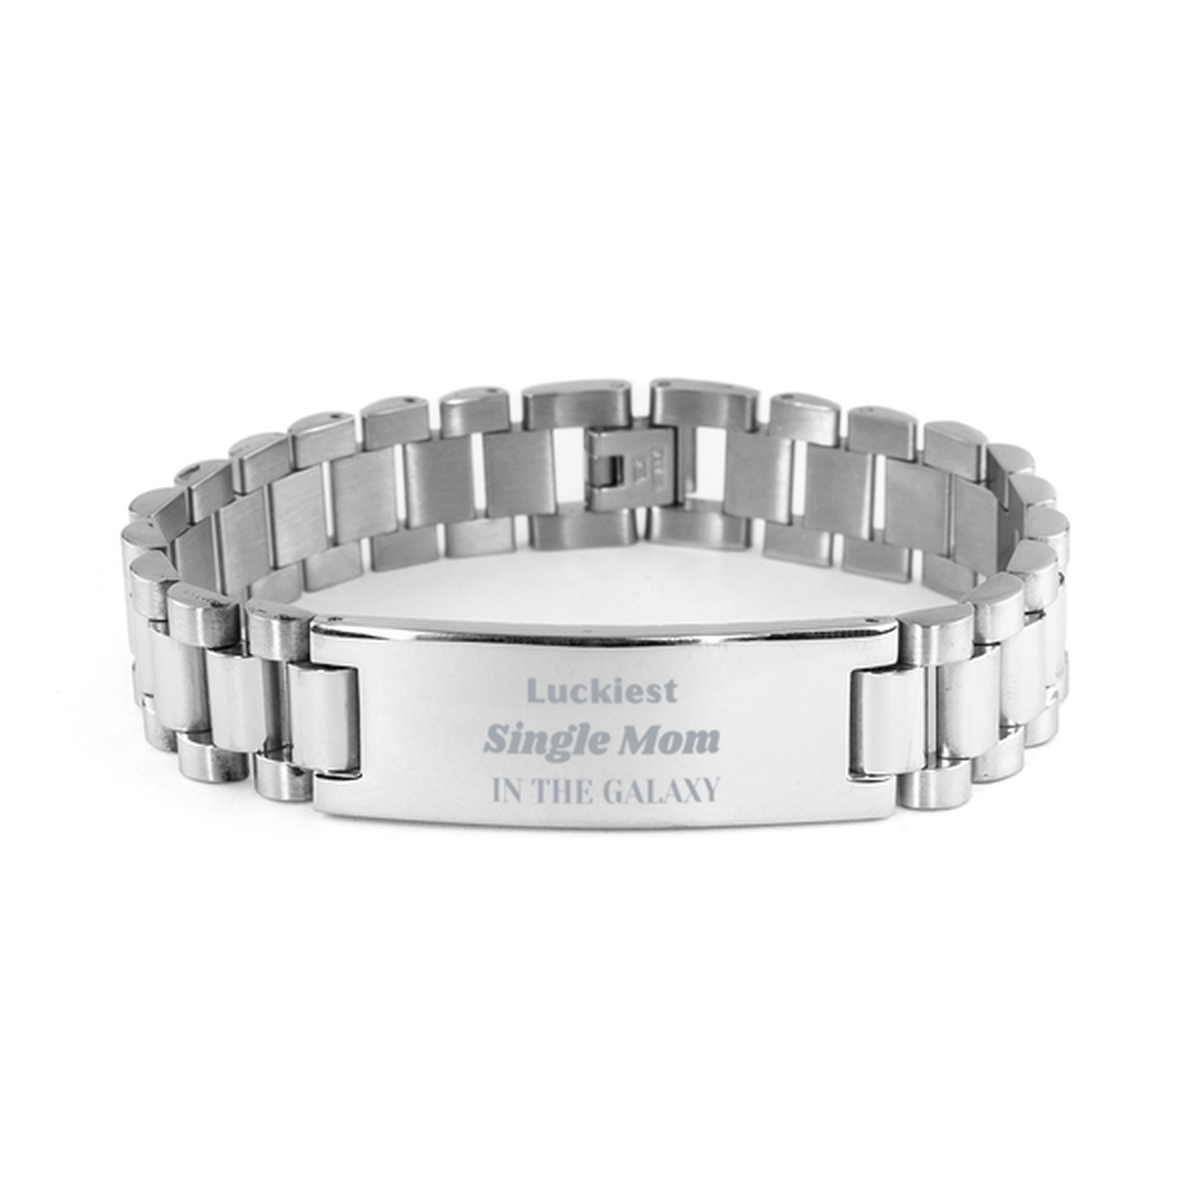 Luckiest Single Mom in the Galaxy, To My Single Mom Engraved Gifts, Christmas Single Mom Ladder Stainless Steel Bracelet Gifts, X-mas Birthday Unique Gifts For Single Mom Men Women